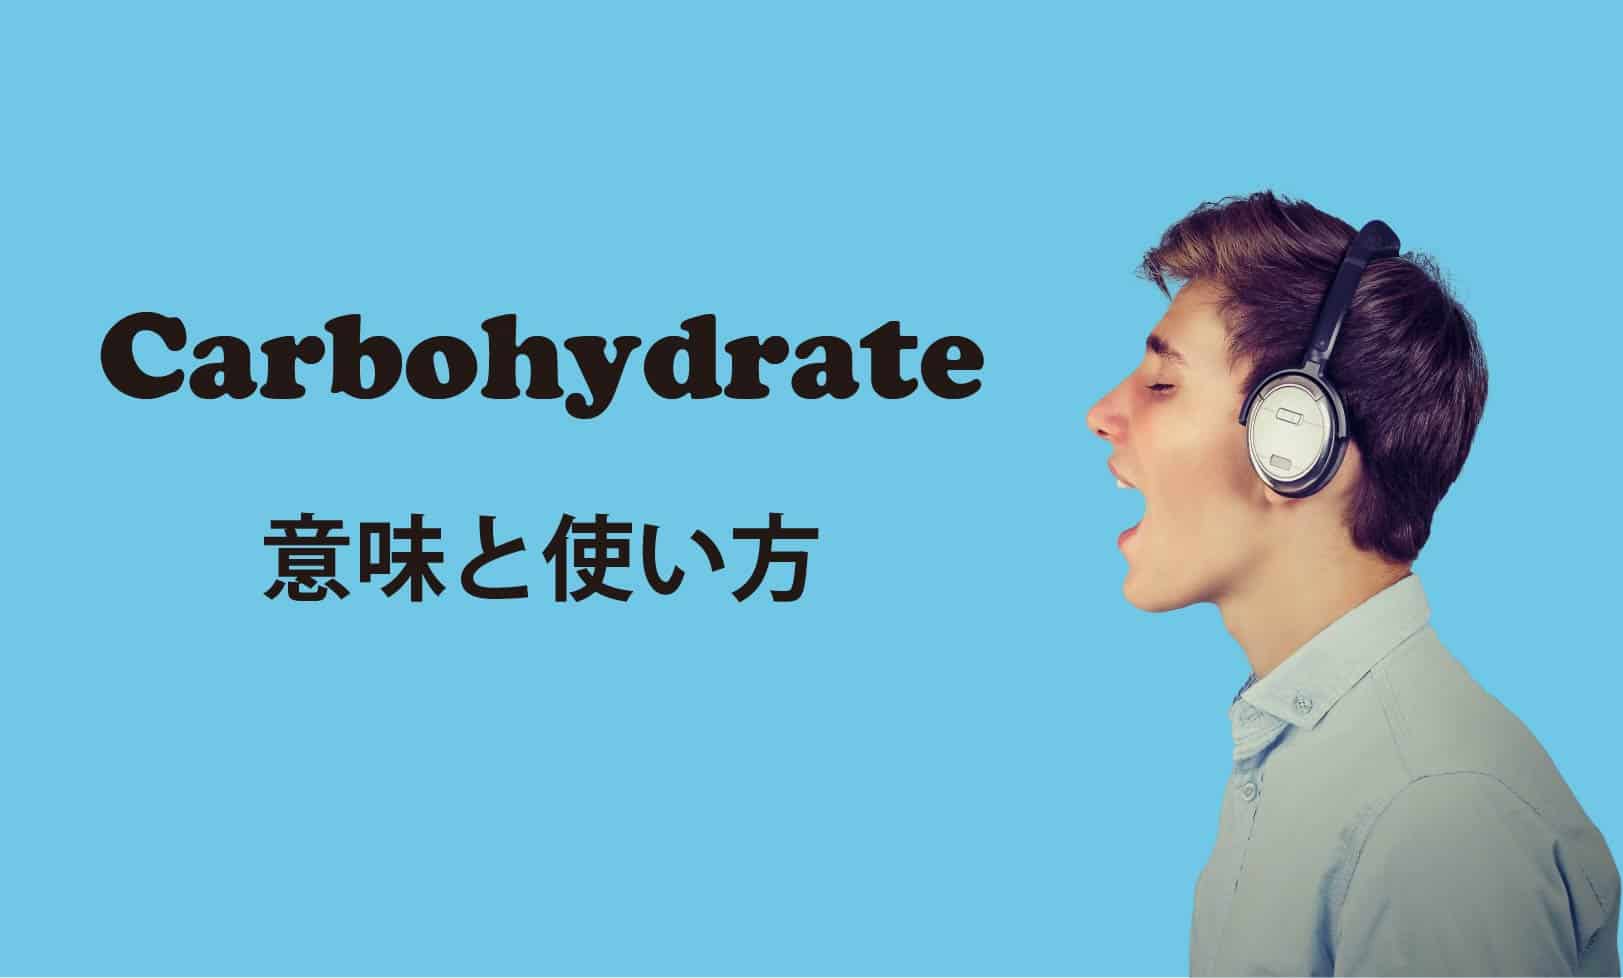 Carbohydrate ブログ　表紙